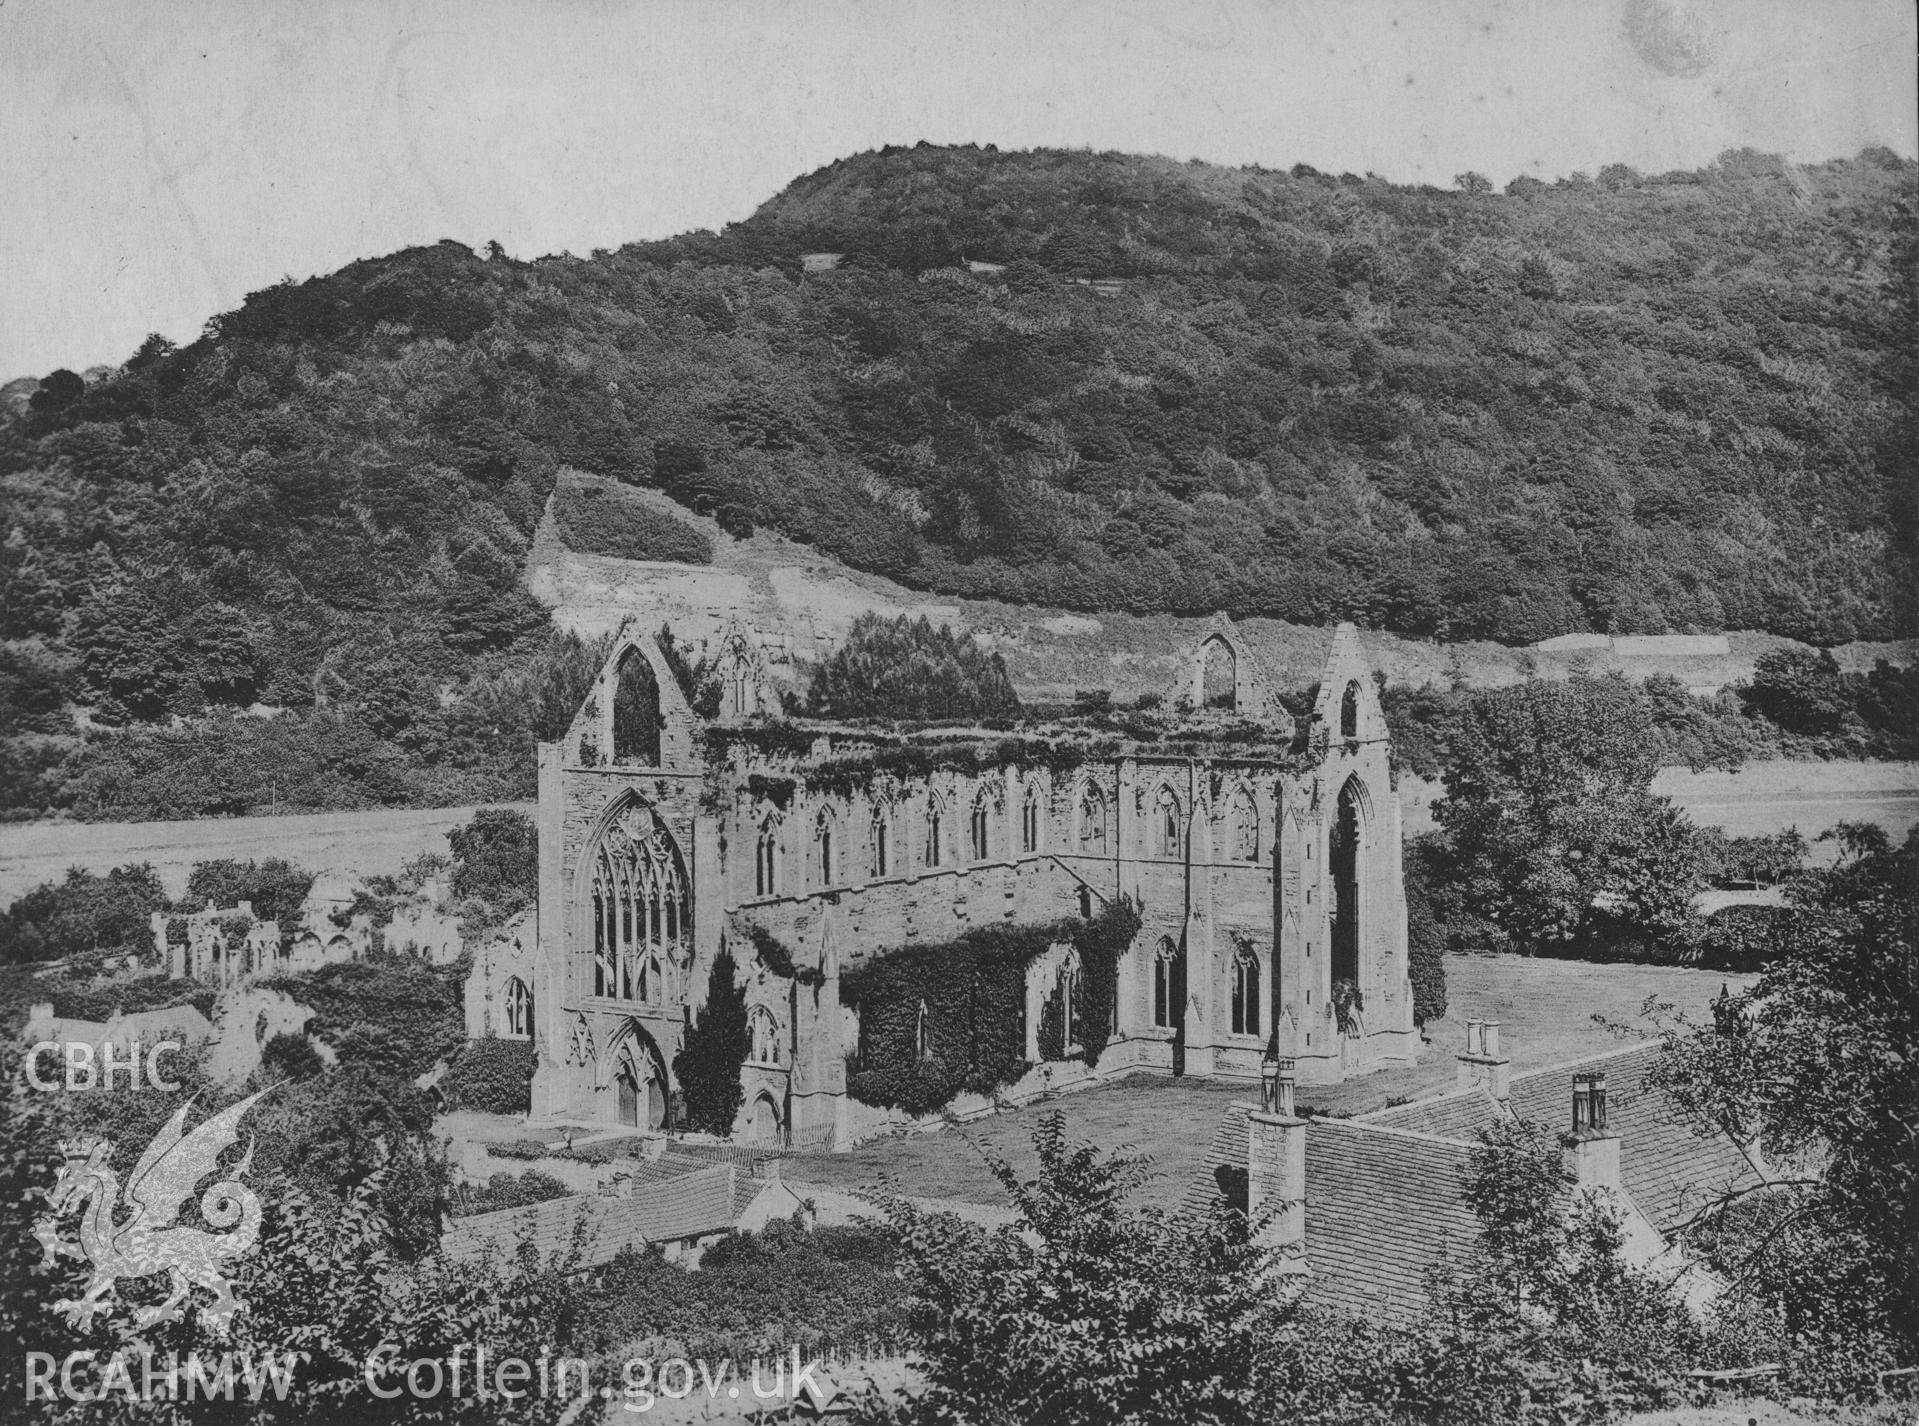 Digital copy of a carbon print showing landscape view of Tintern Abbey.